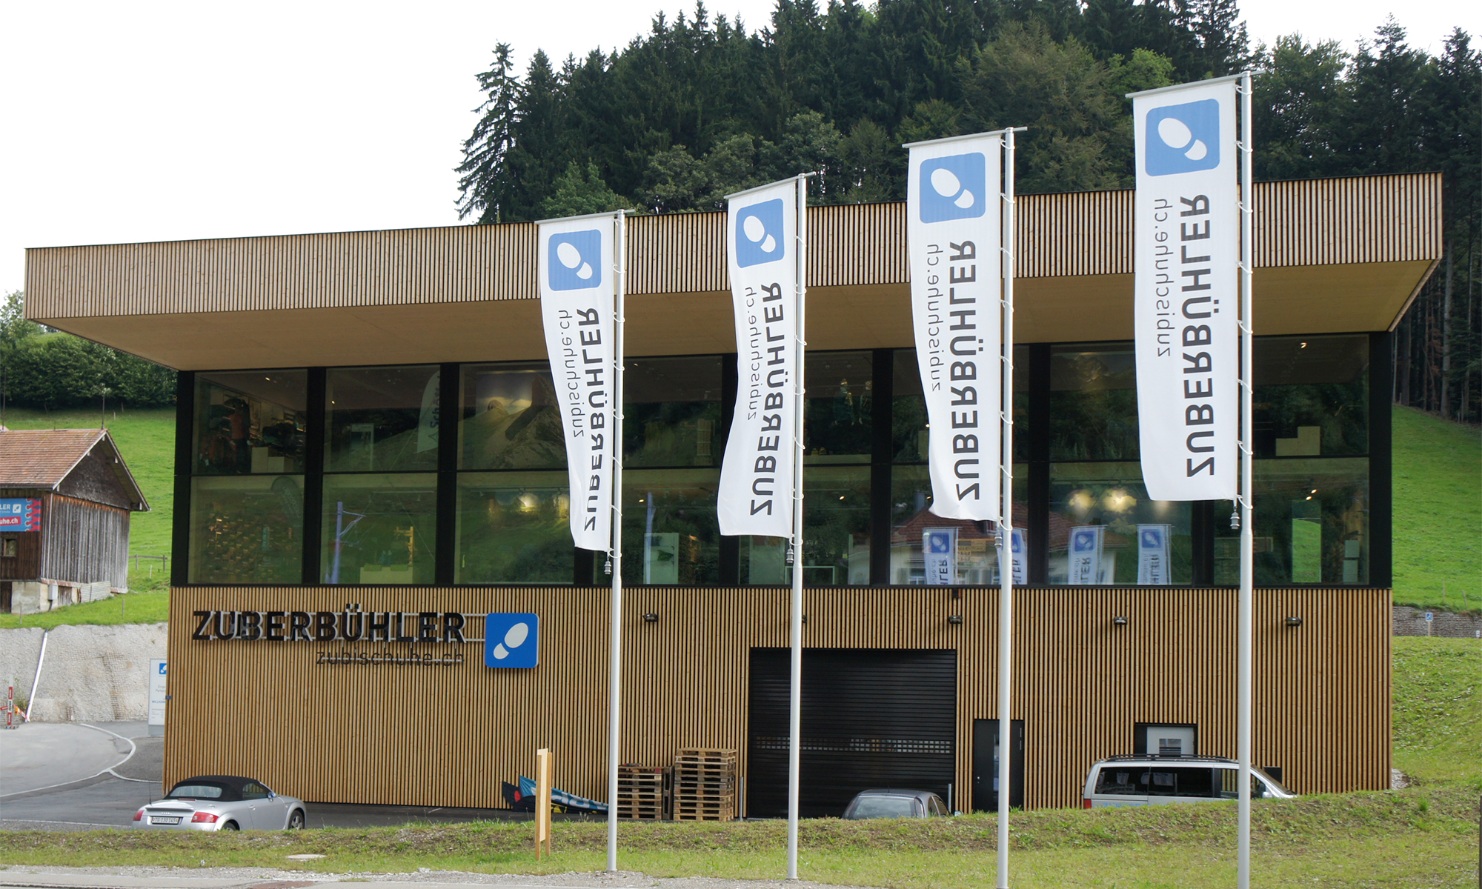 External view of the Zuberbühler industrial building in Herisau with flags in the foreground.